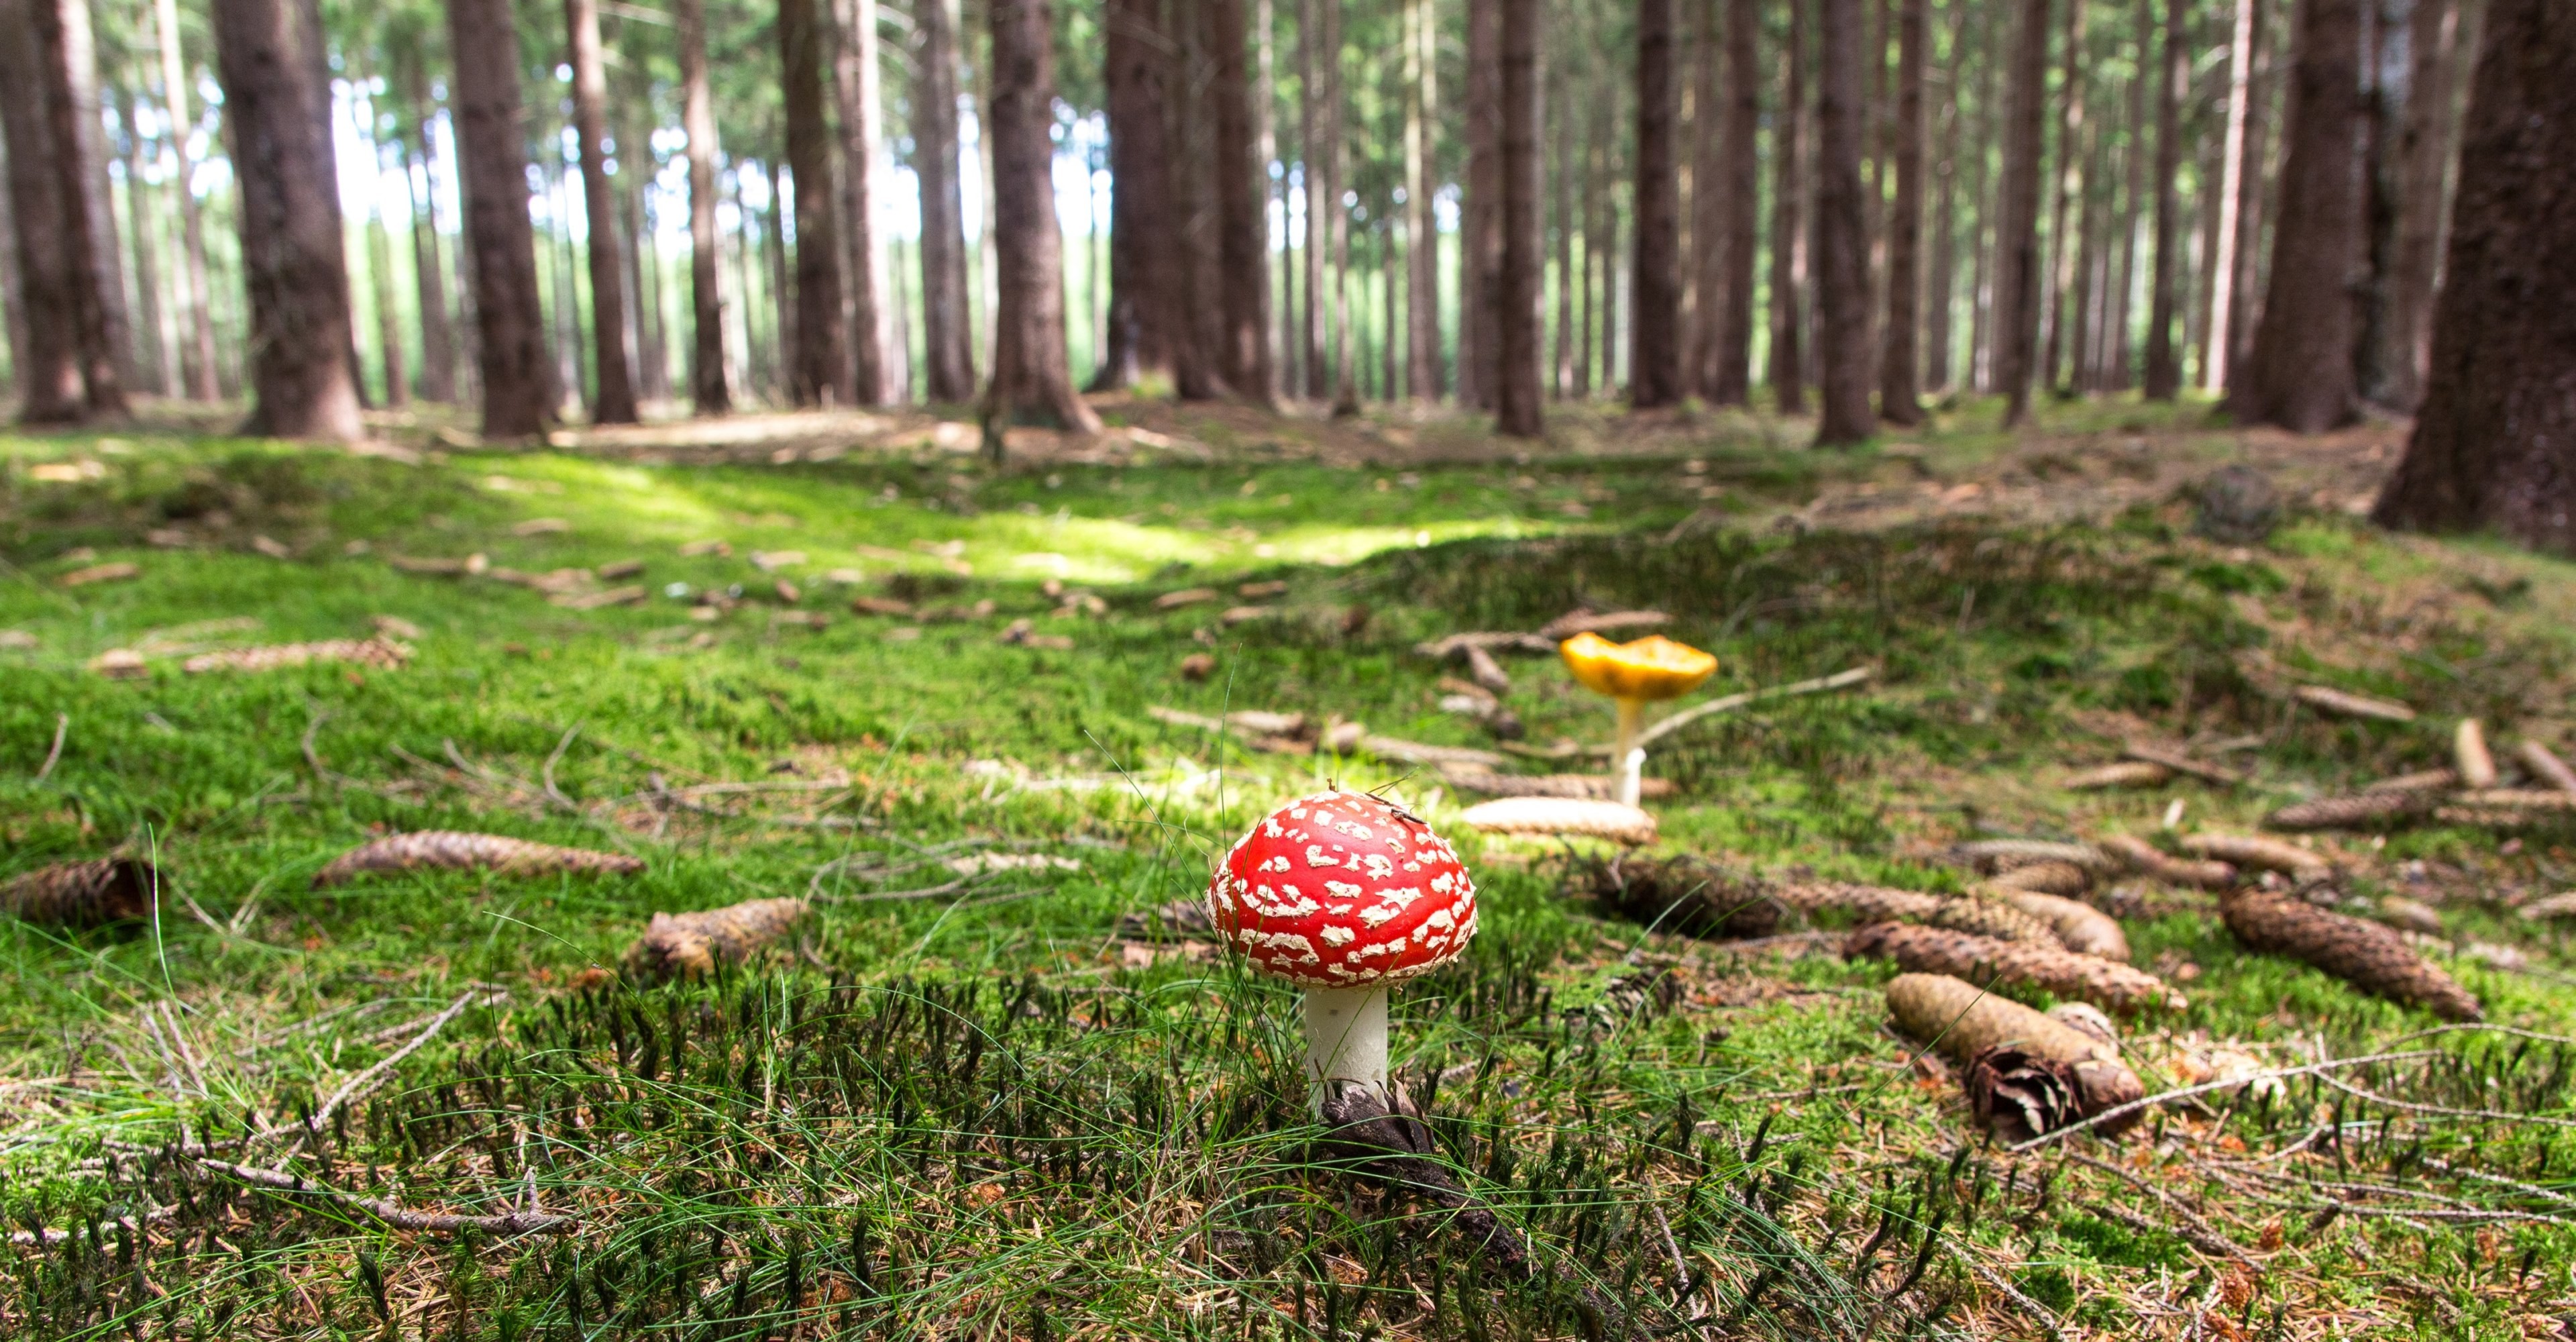 3840x2000 # #fly agaric #mushroom #forest #forestry #forest floor 4k  wallpaper and background #106377